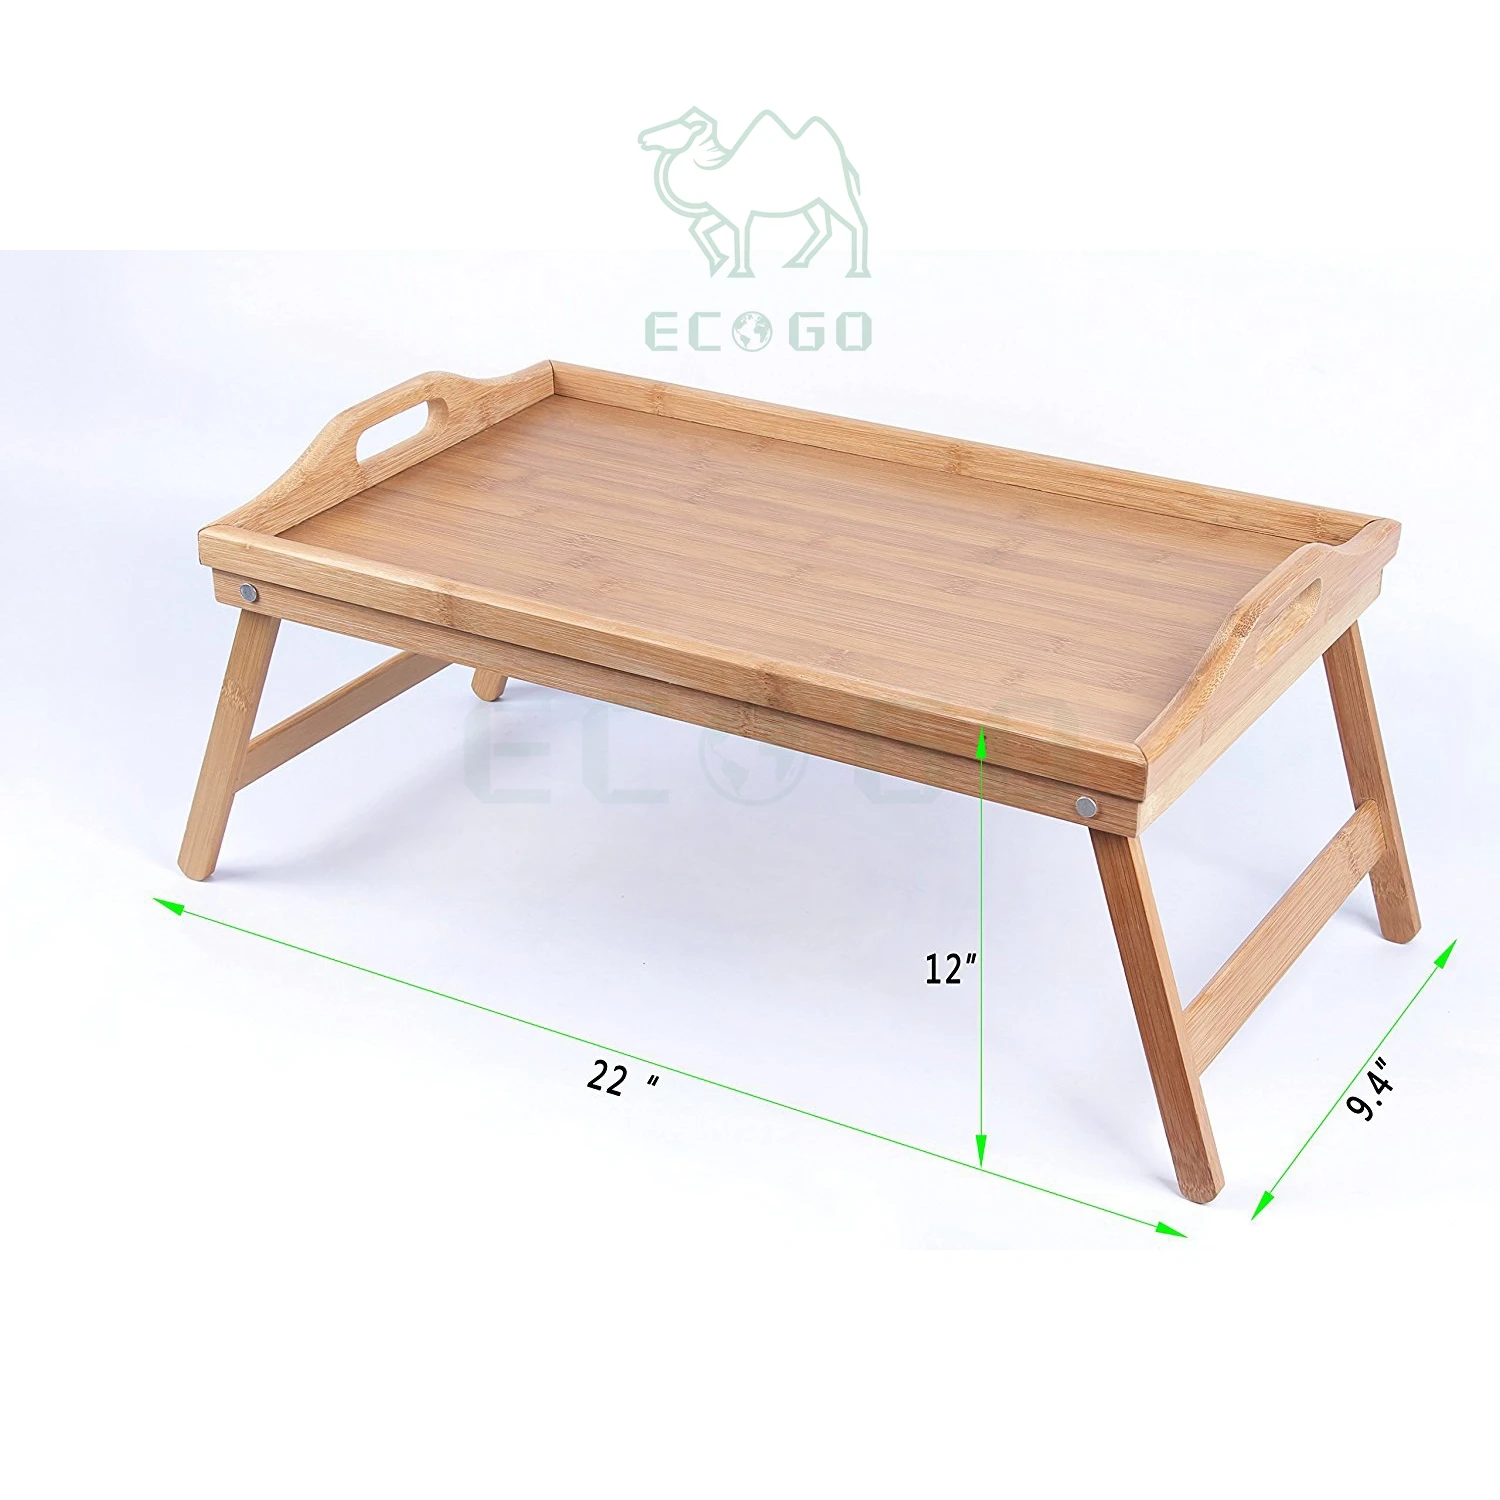 Wooden Laptop Desk Folding Breakfast Tray For Bed Tray With Legs Buy Wooden Bed Tray Table